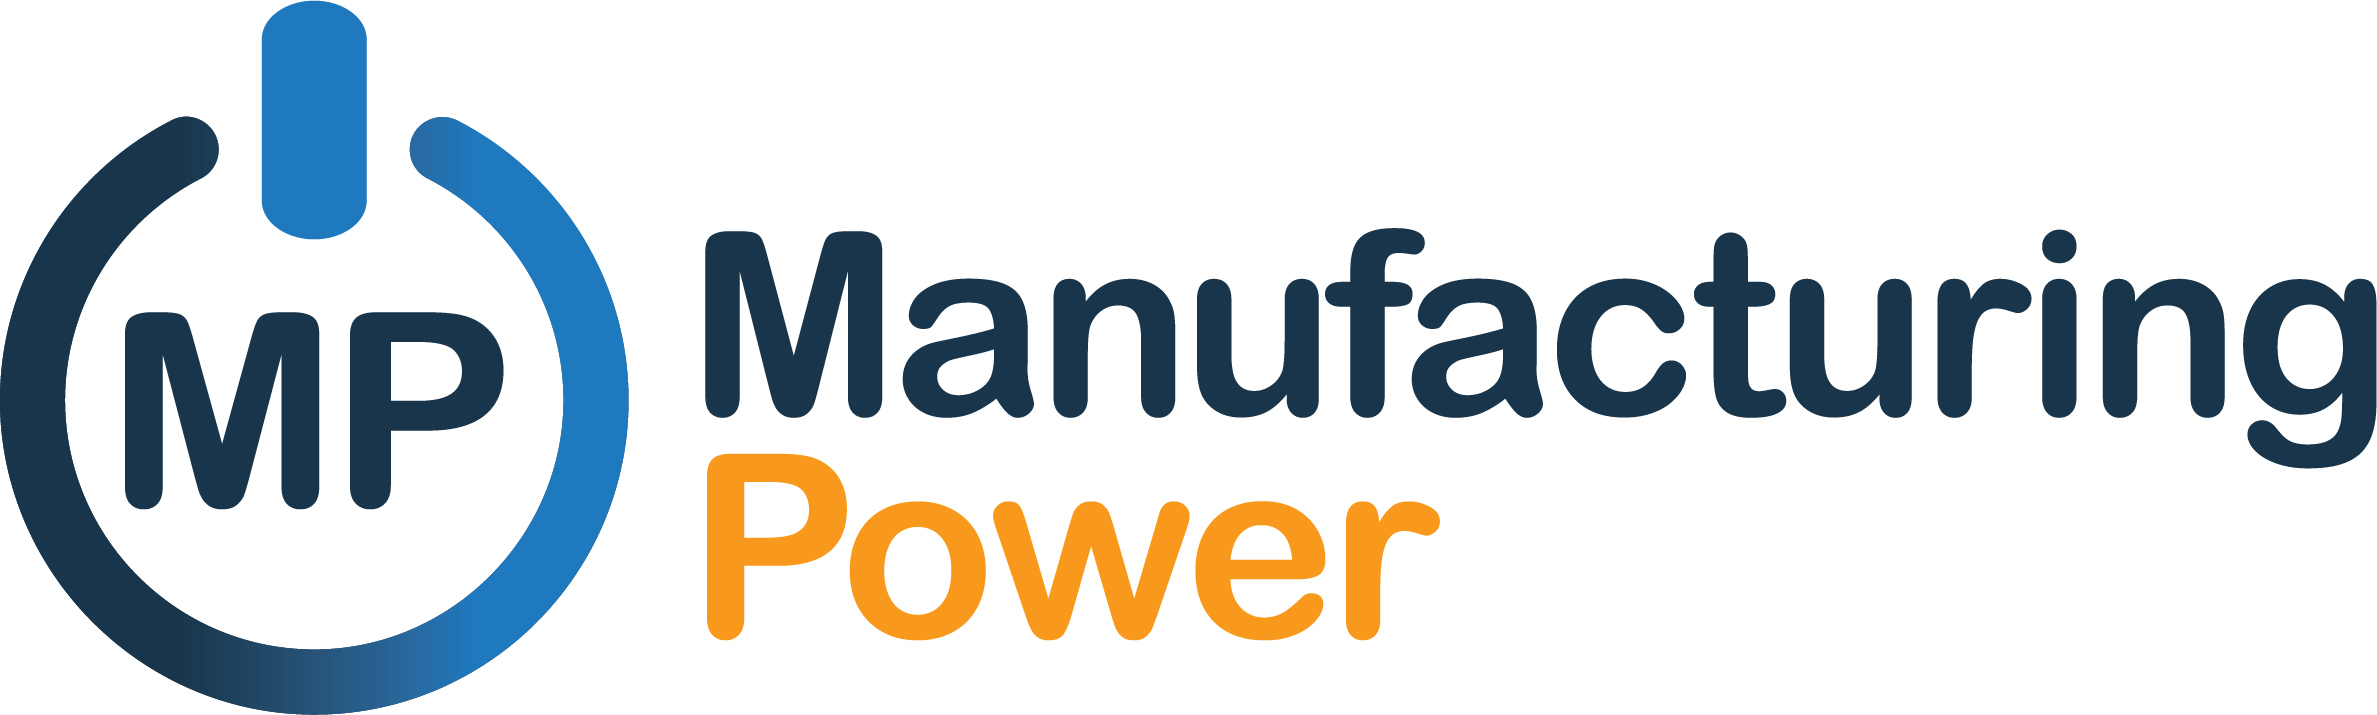 ManufacturingPower New Video Explains Competitive Pricing Technology for Small and Mid-Sized Manufacturers 